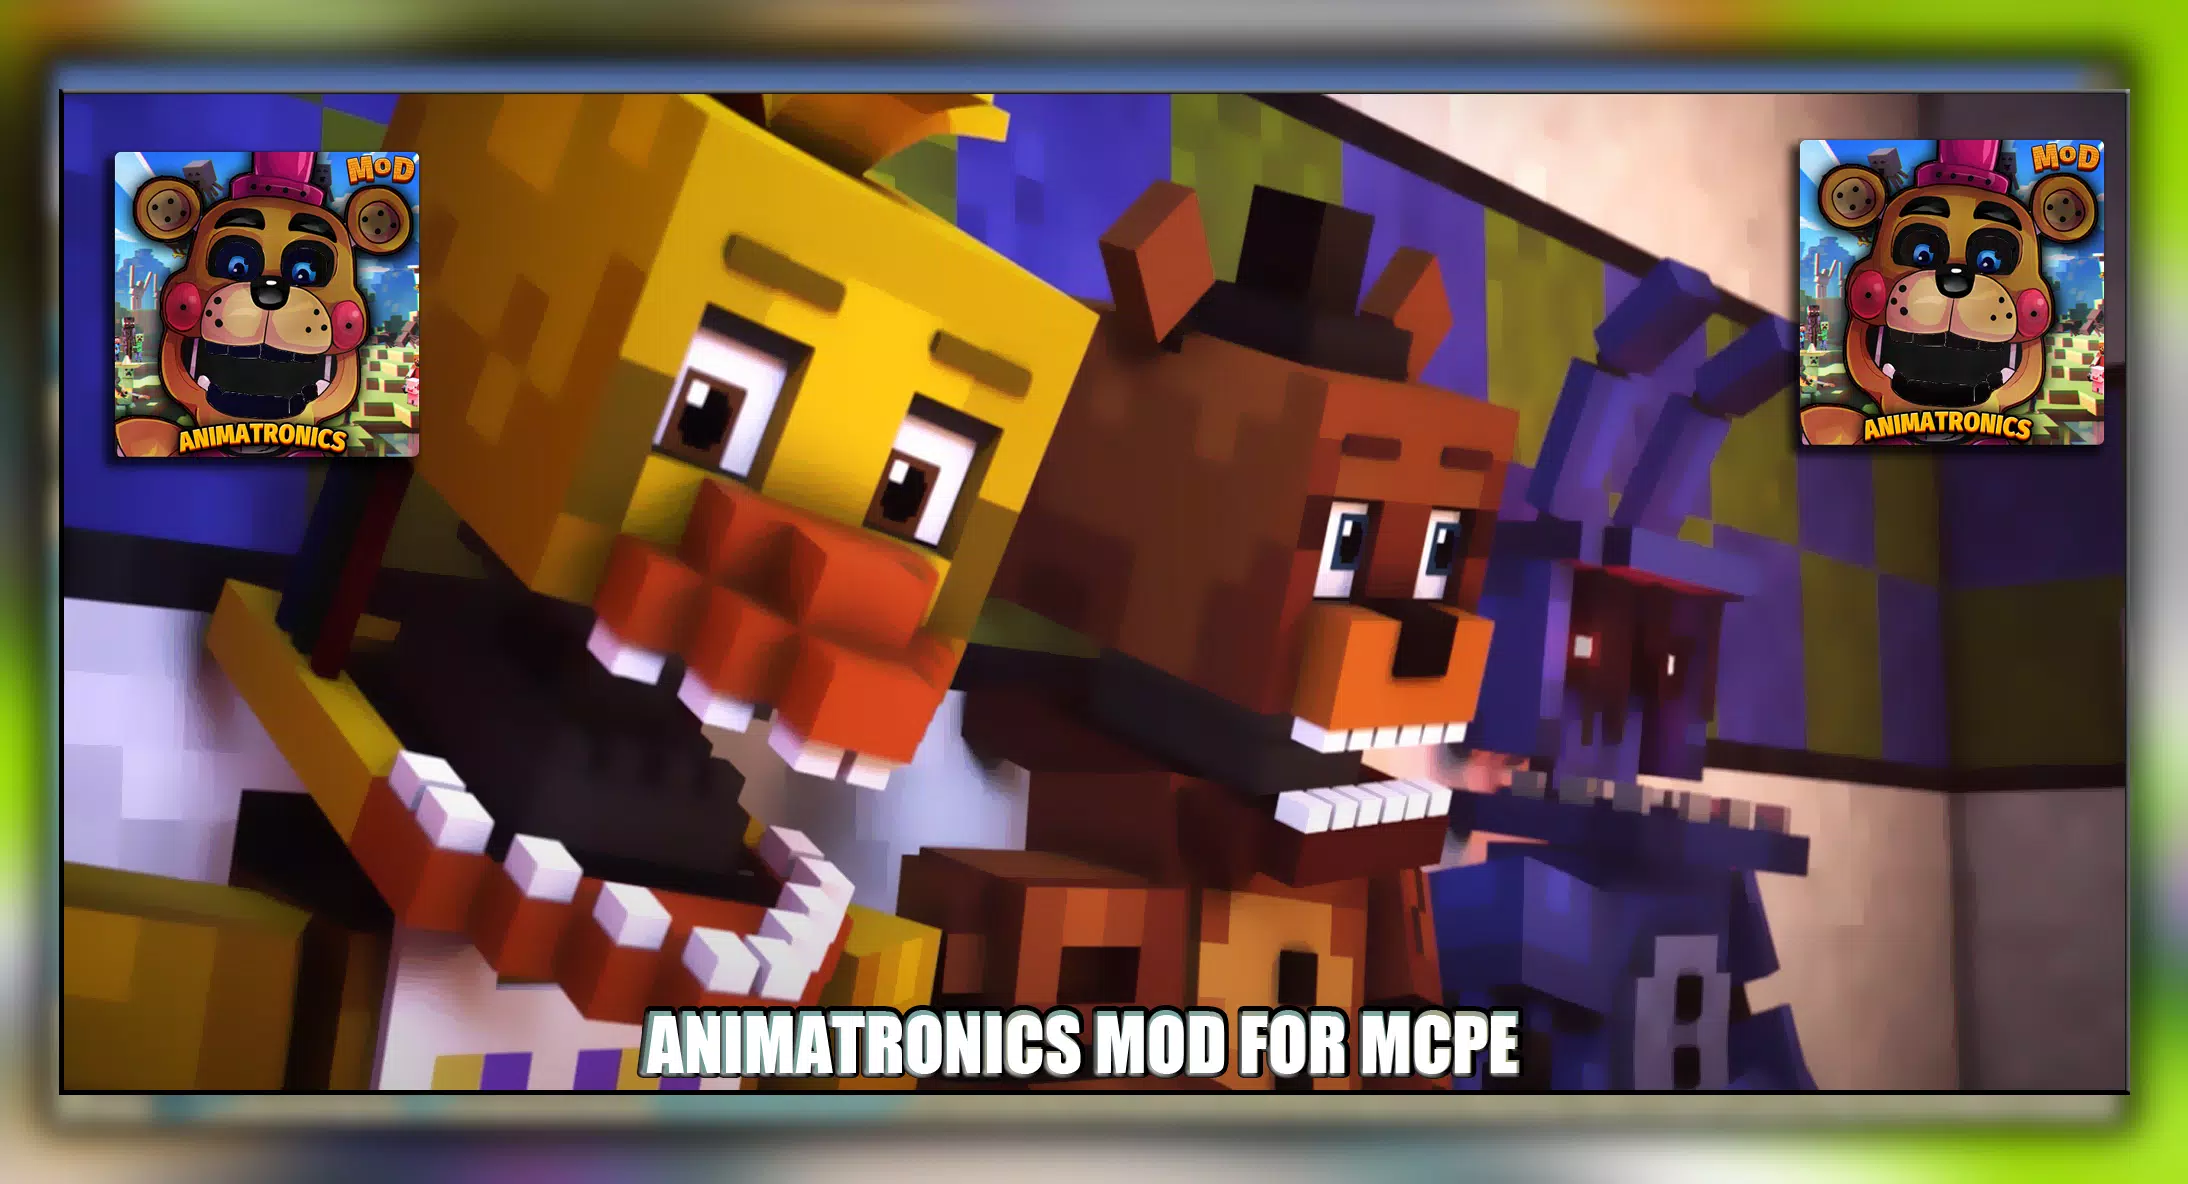 Mod FNAF for Minecraft PE - 5 Nights at Free Download